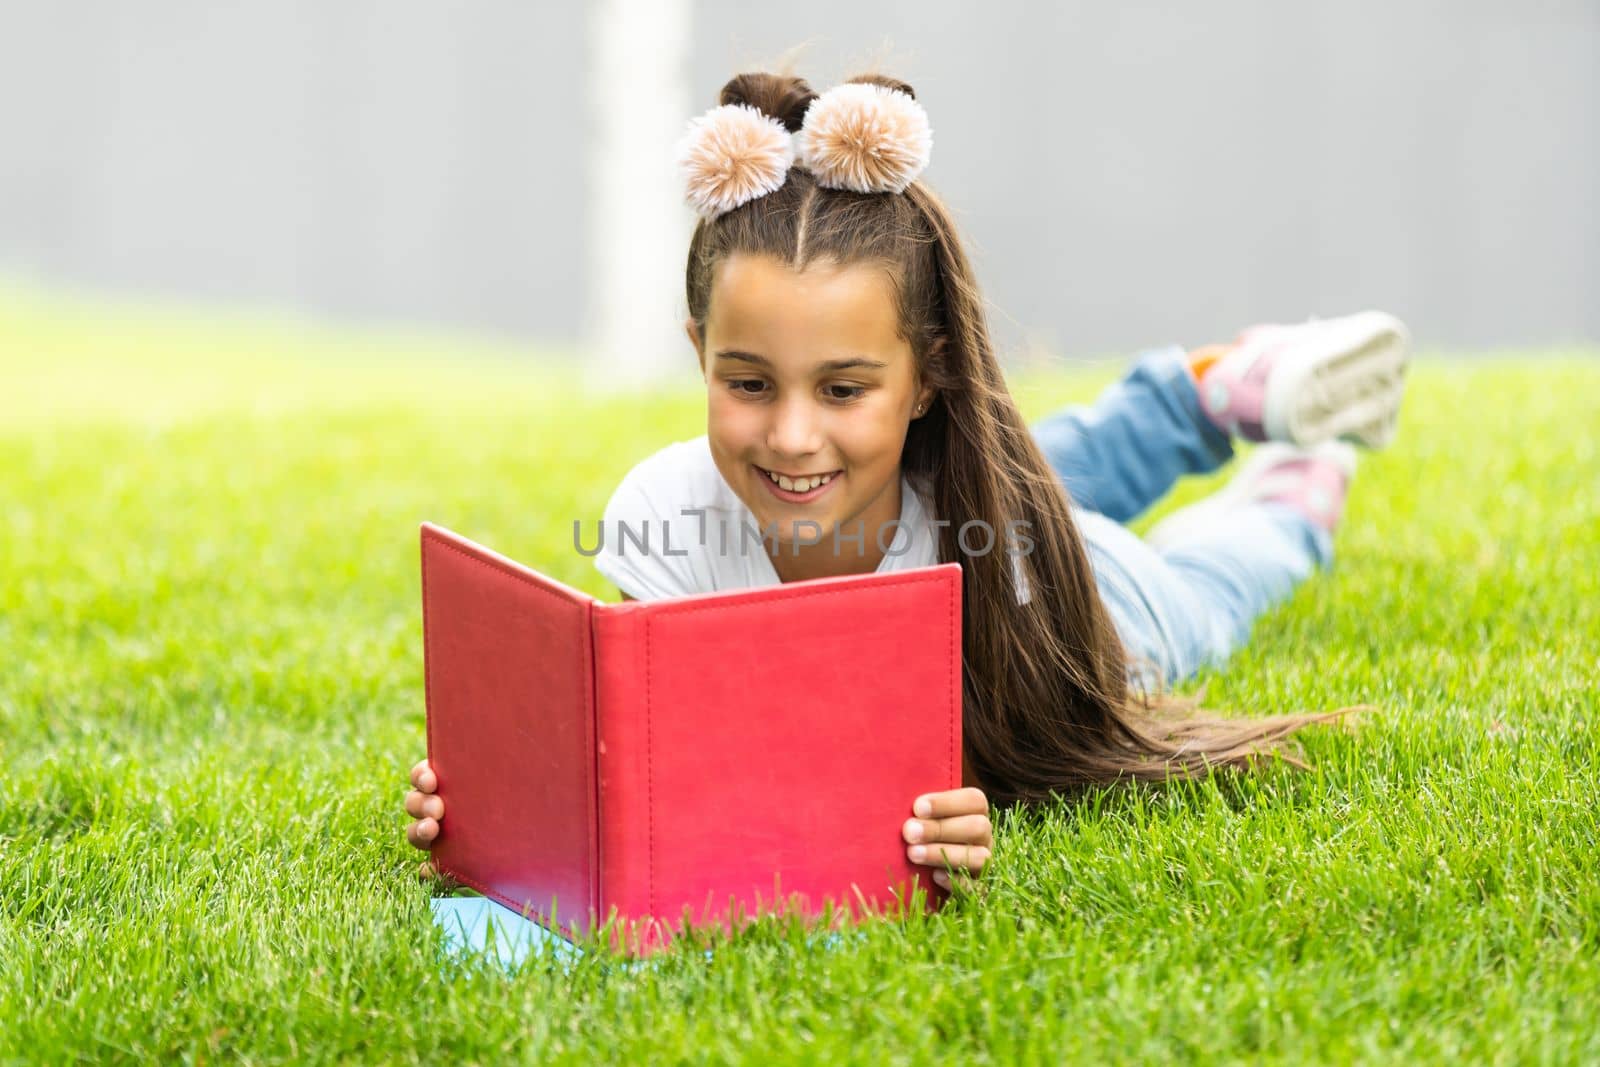 Cute Little Girl Reading Book Outside on Grass by Andelov13